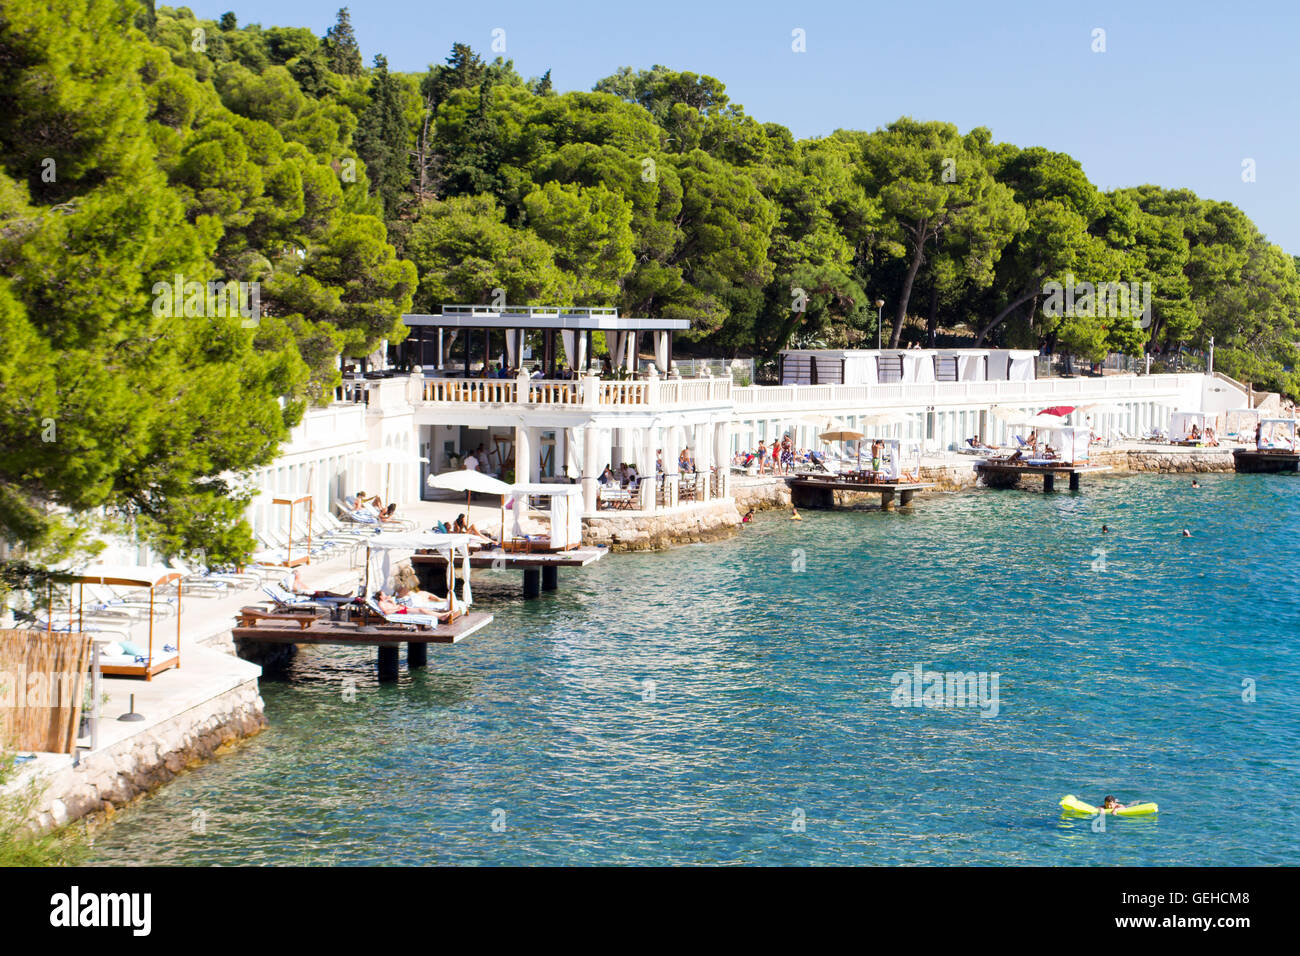 STARI GRAD, CROATIA - JULY 1, 2014: Unidentified people at Stari Grad on Hvar island, Croatia. Stari Grad (Pharos) is the oldest Stock Photo